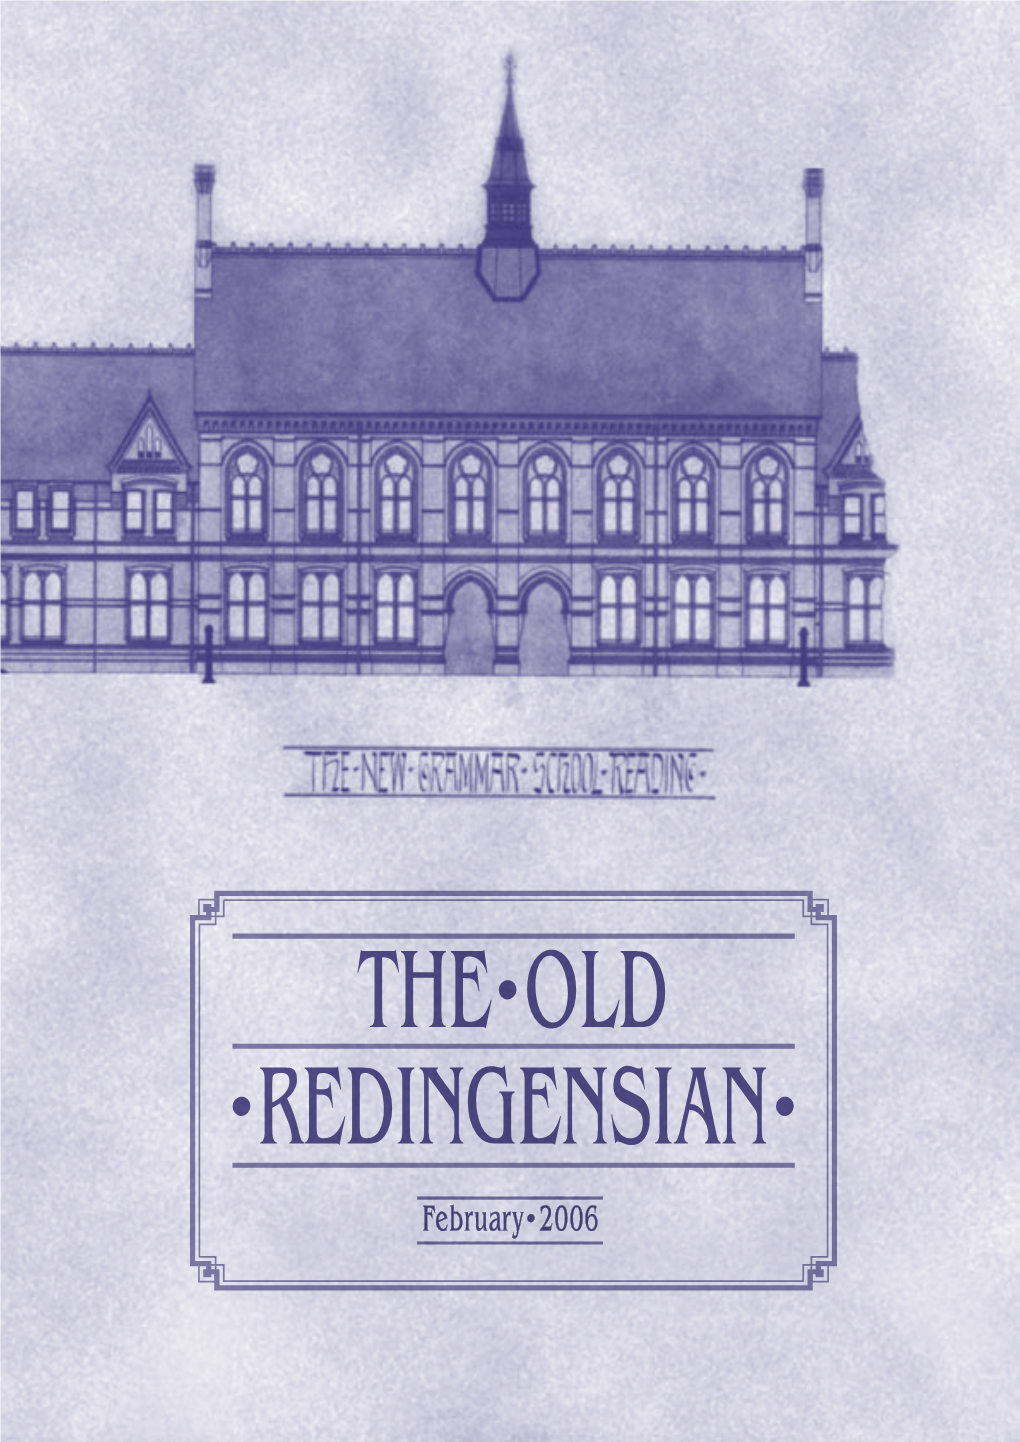 View Is the Subject of the Old Redingensian Publication and and Appreciation